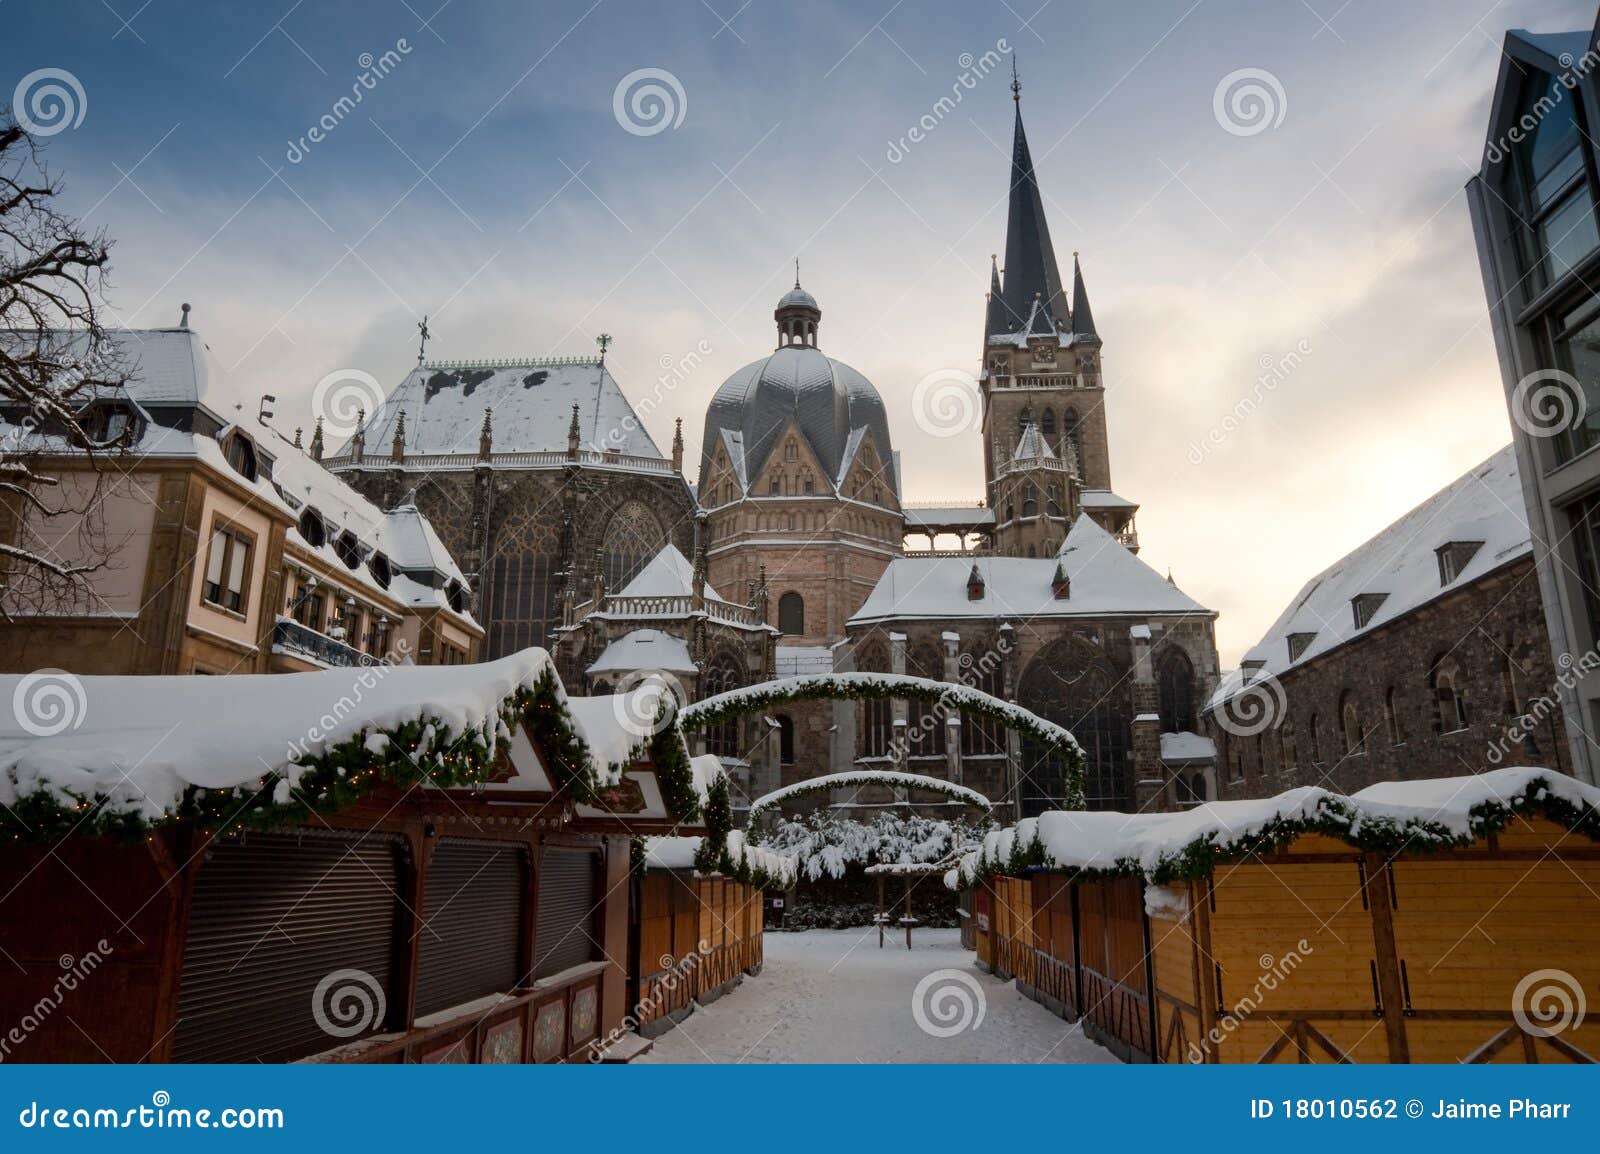 aachen cathedral